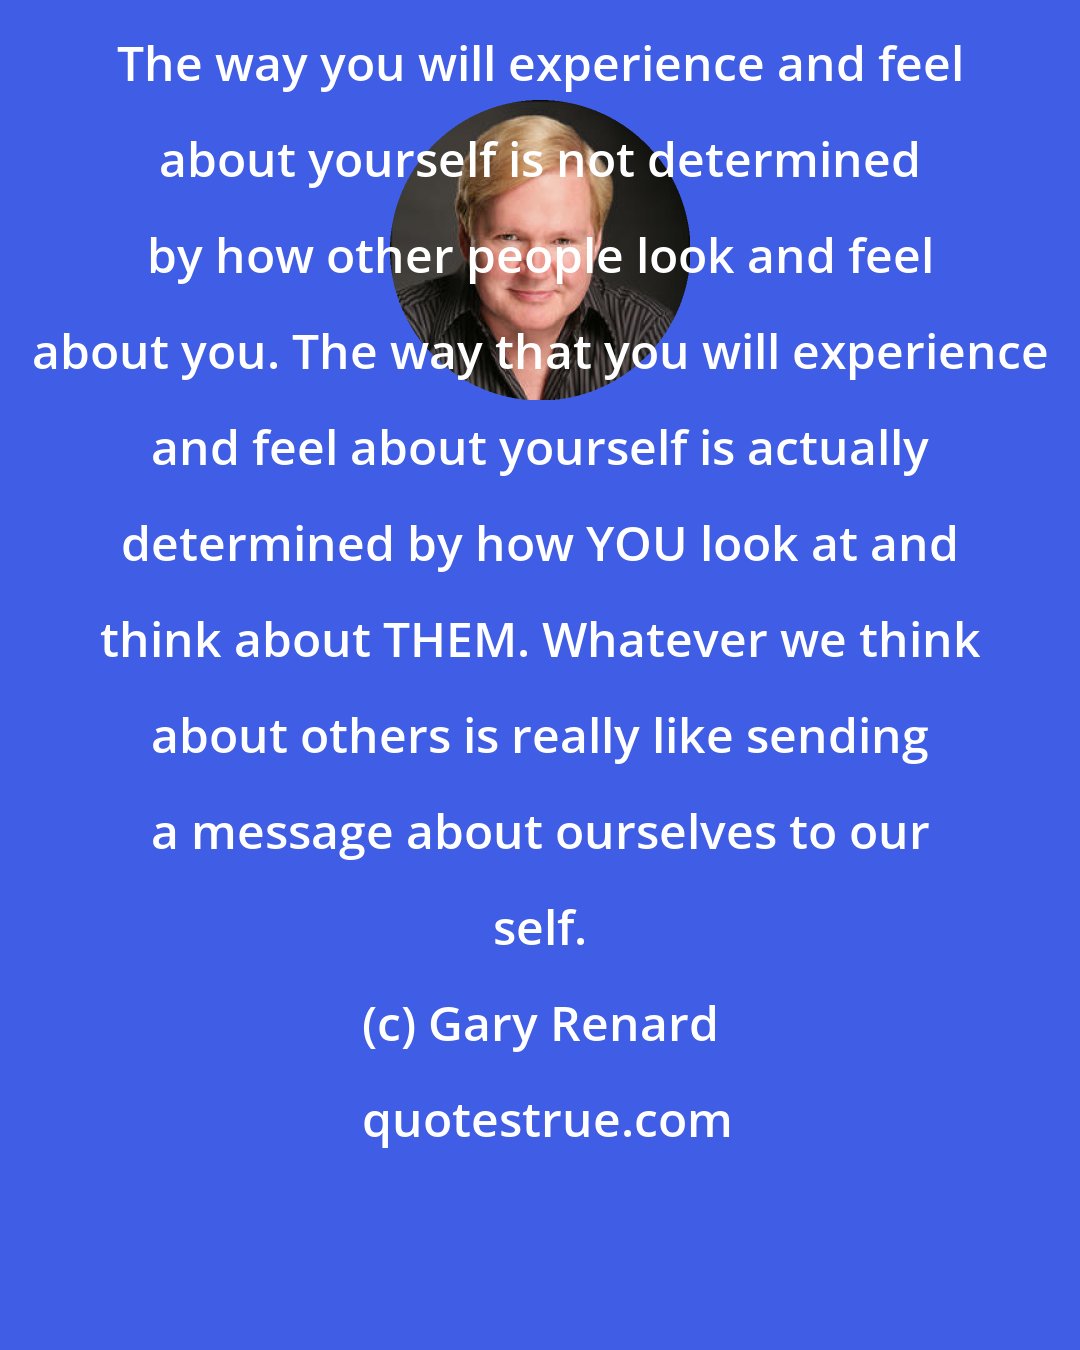 Gary Renard: The way you will experience and feel about yourself is not determined by how other people look and feel about you. The way that you will experience and feel about yourself is actually determined by how YOU look at and think about THEM. Whatever we think about others is really like sending a message about ourselves to our self.